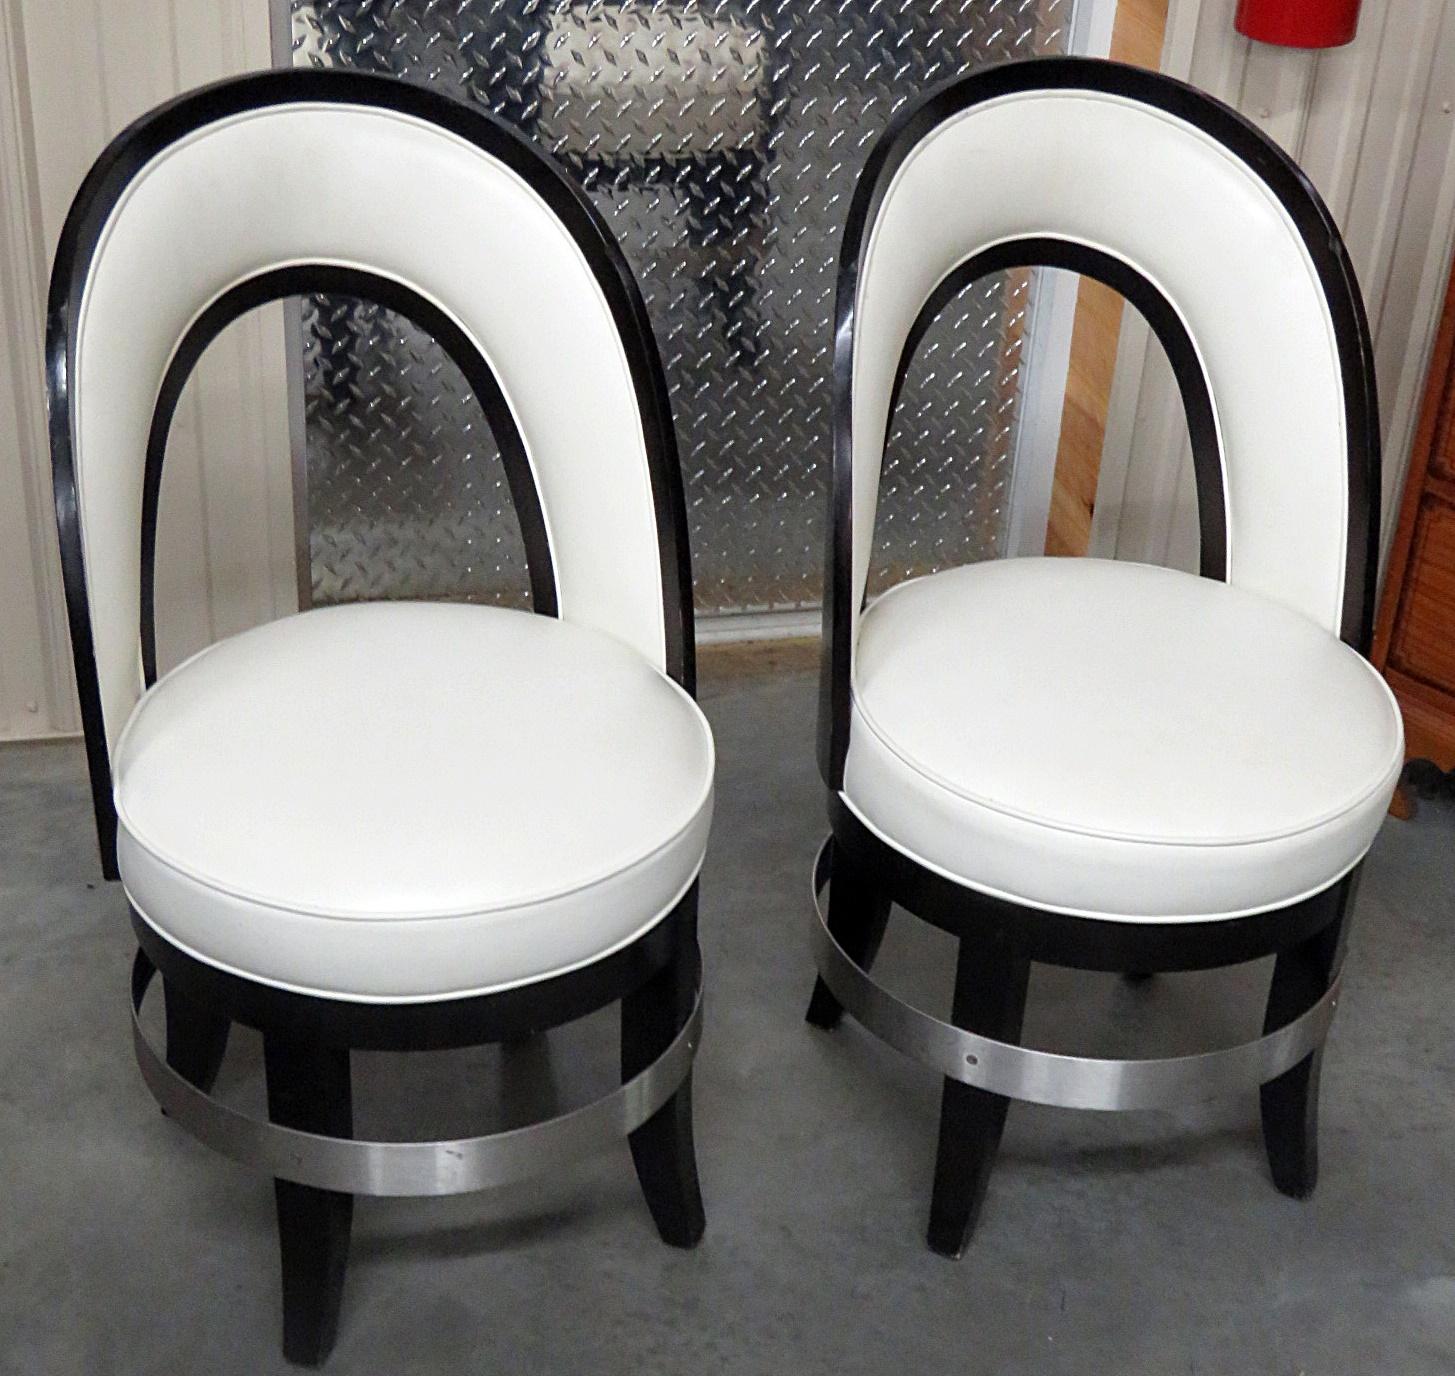 Pair of Mid-Century Modern swiveling club chairs with an ebonized frame and leather upholstery.